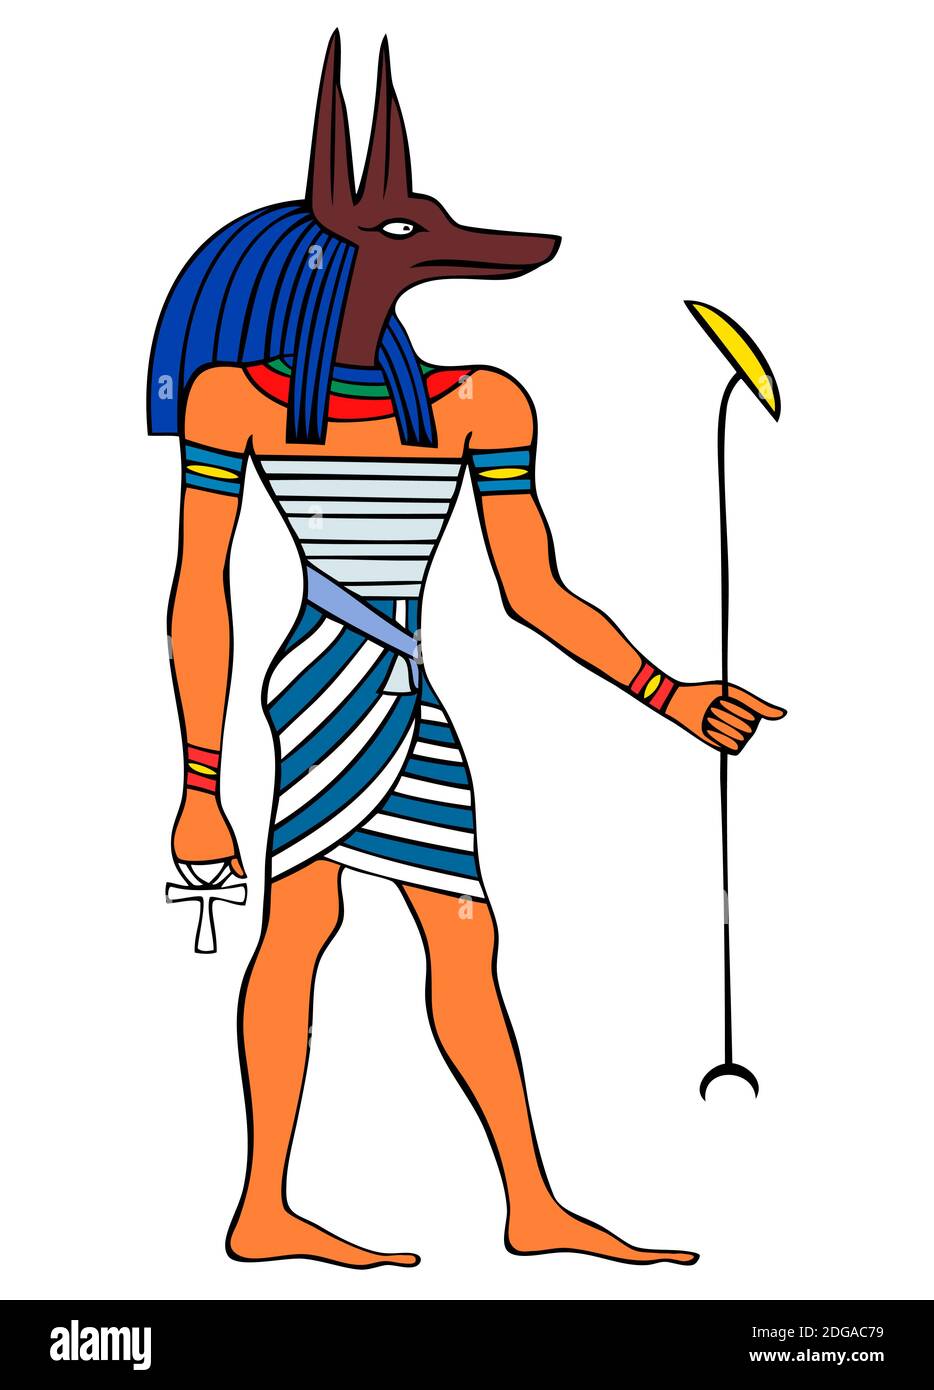 God of Ancient Egypt - Anubis - Yinepu - dog or jackal god of embalming and tomb-caretaker who watches over the dead Stock Photo